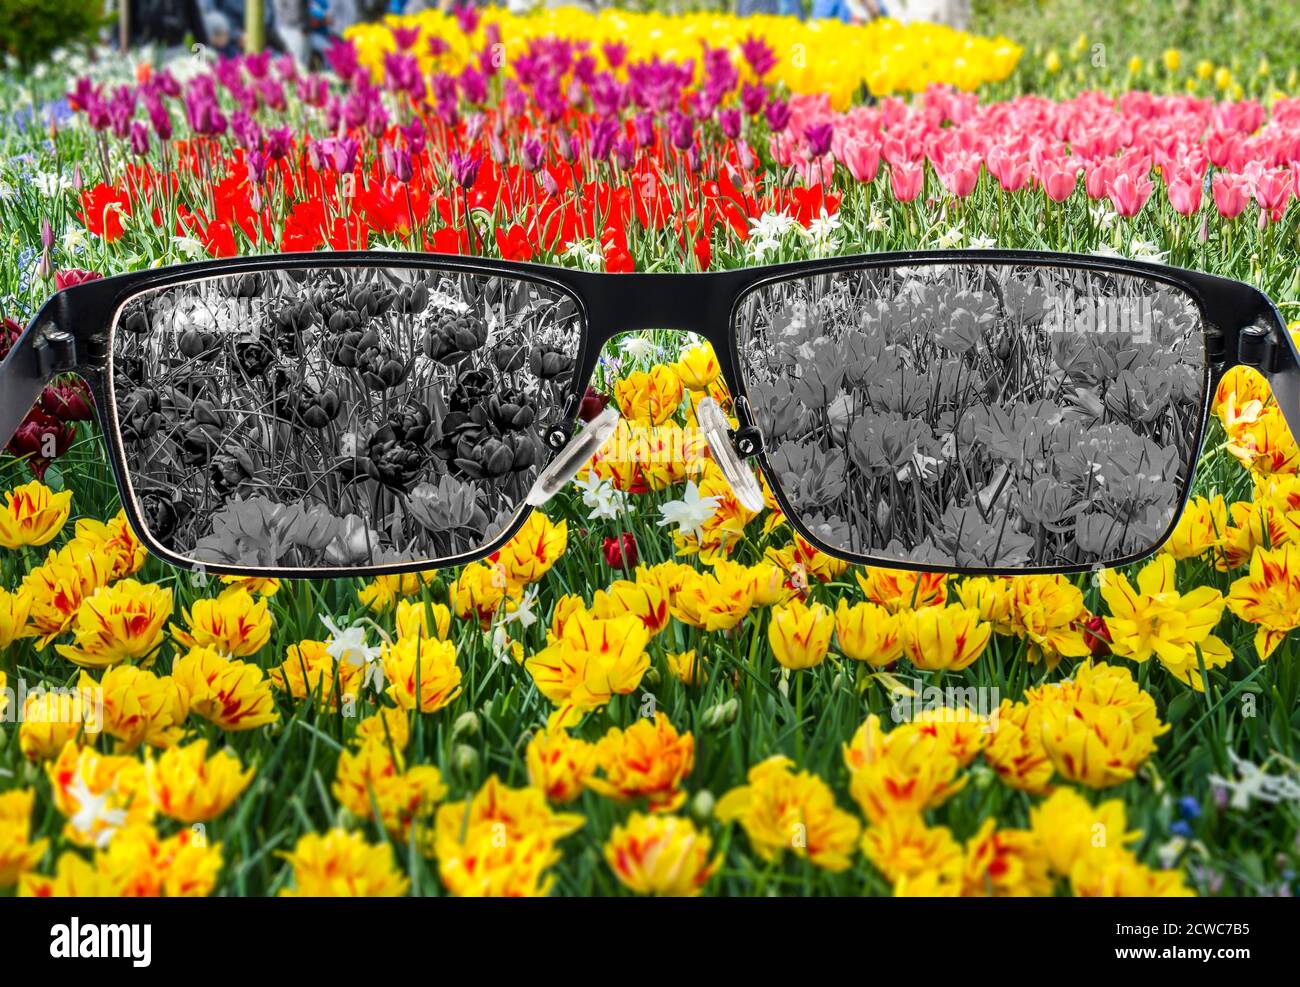 Bleached view of tulips in glasses against colorful background.  World perception during depression. Medical condition. Health and disease concept. Stock Photo